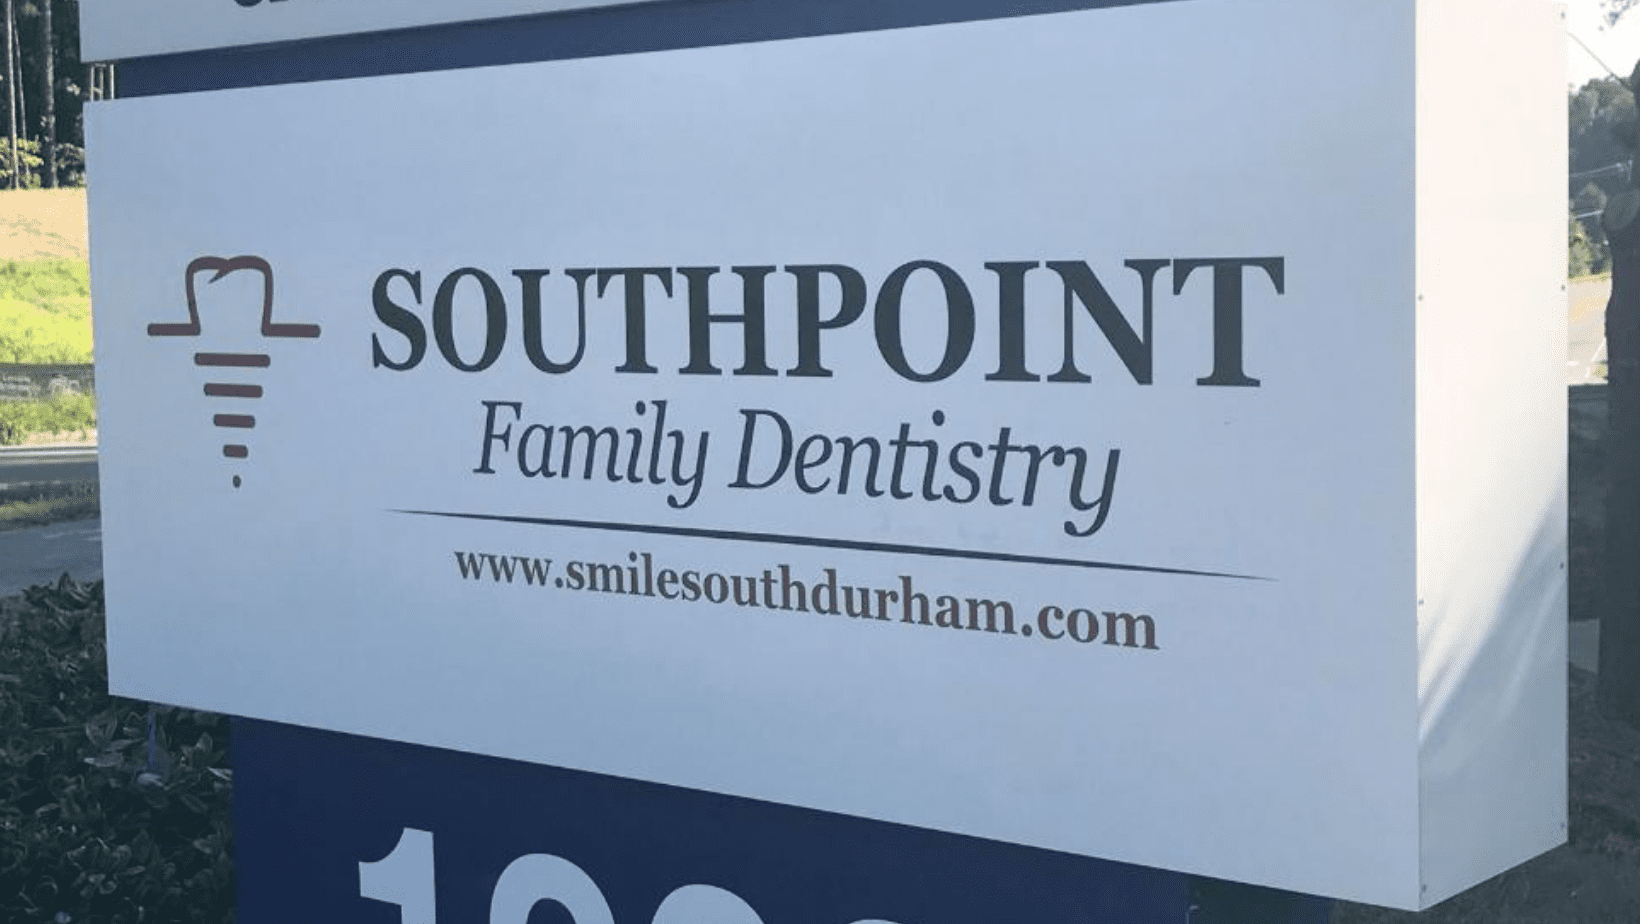 Contact Southpoint Family Dentistry